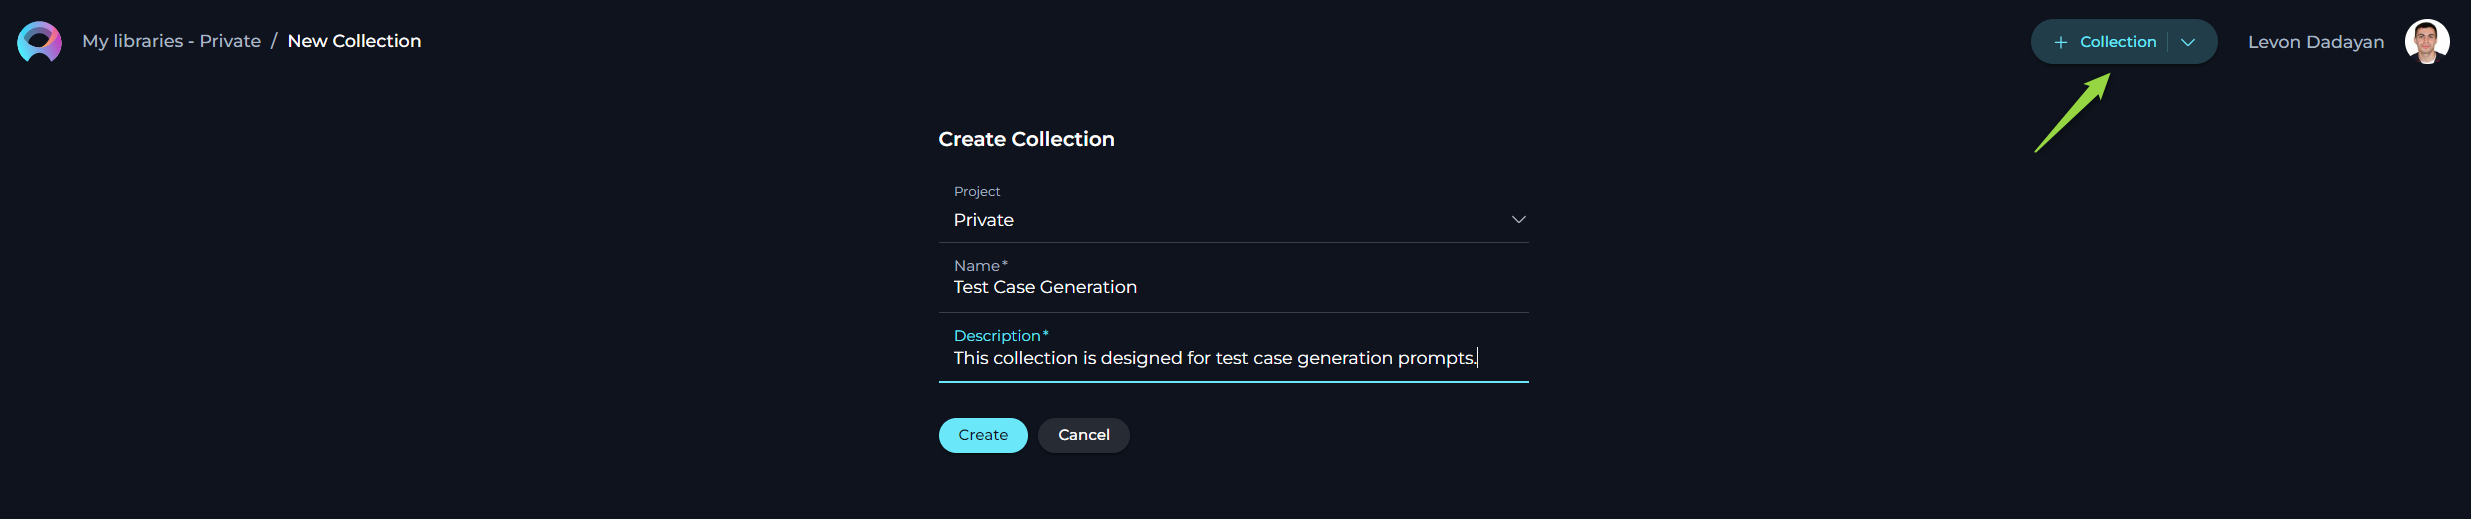 Collection-Create_Collection